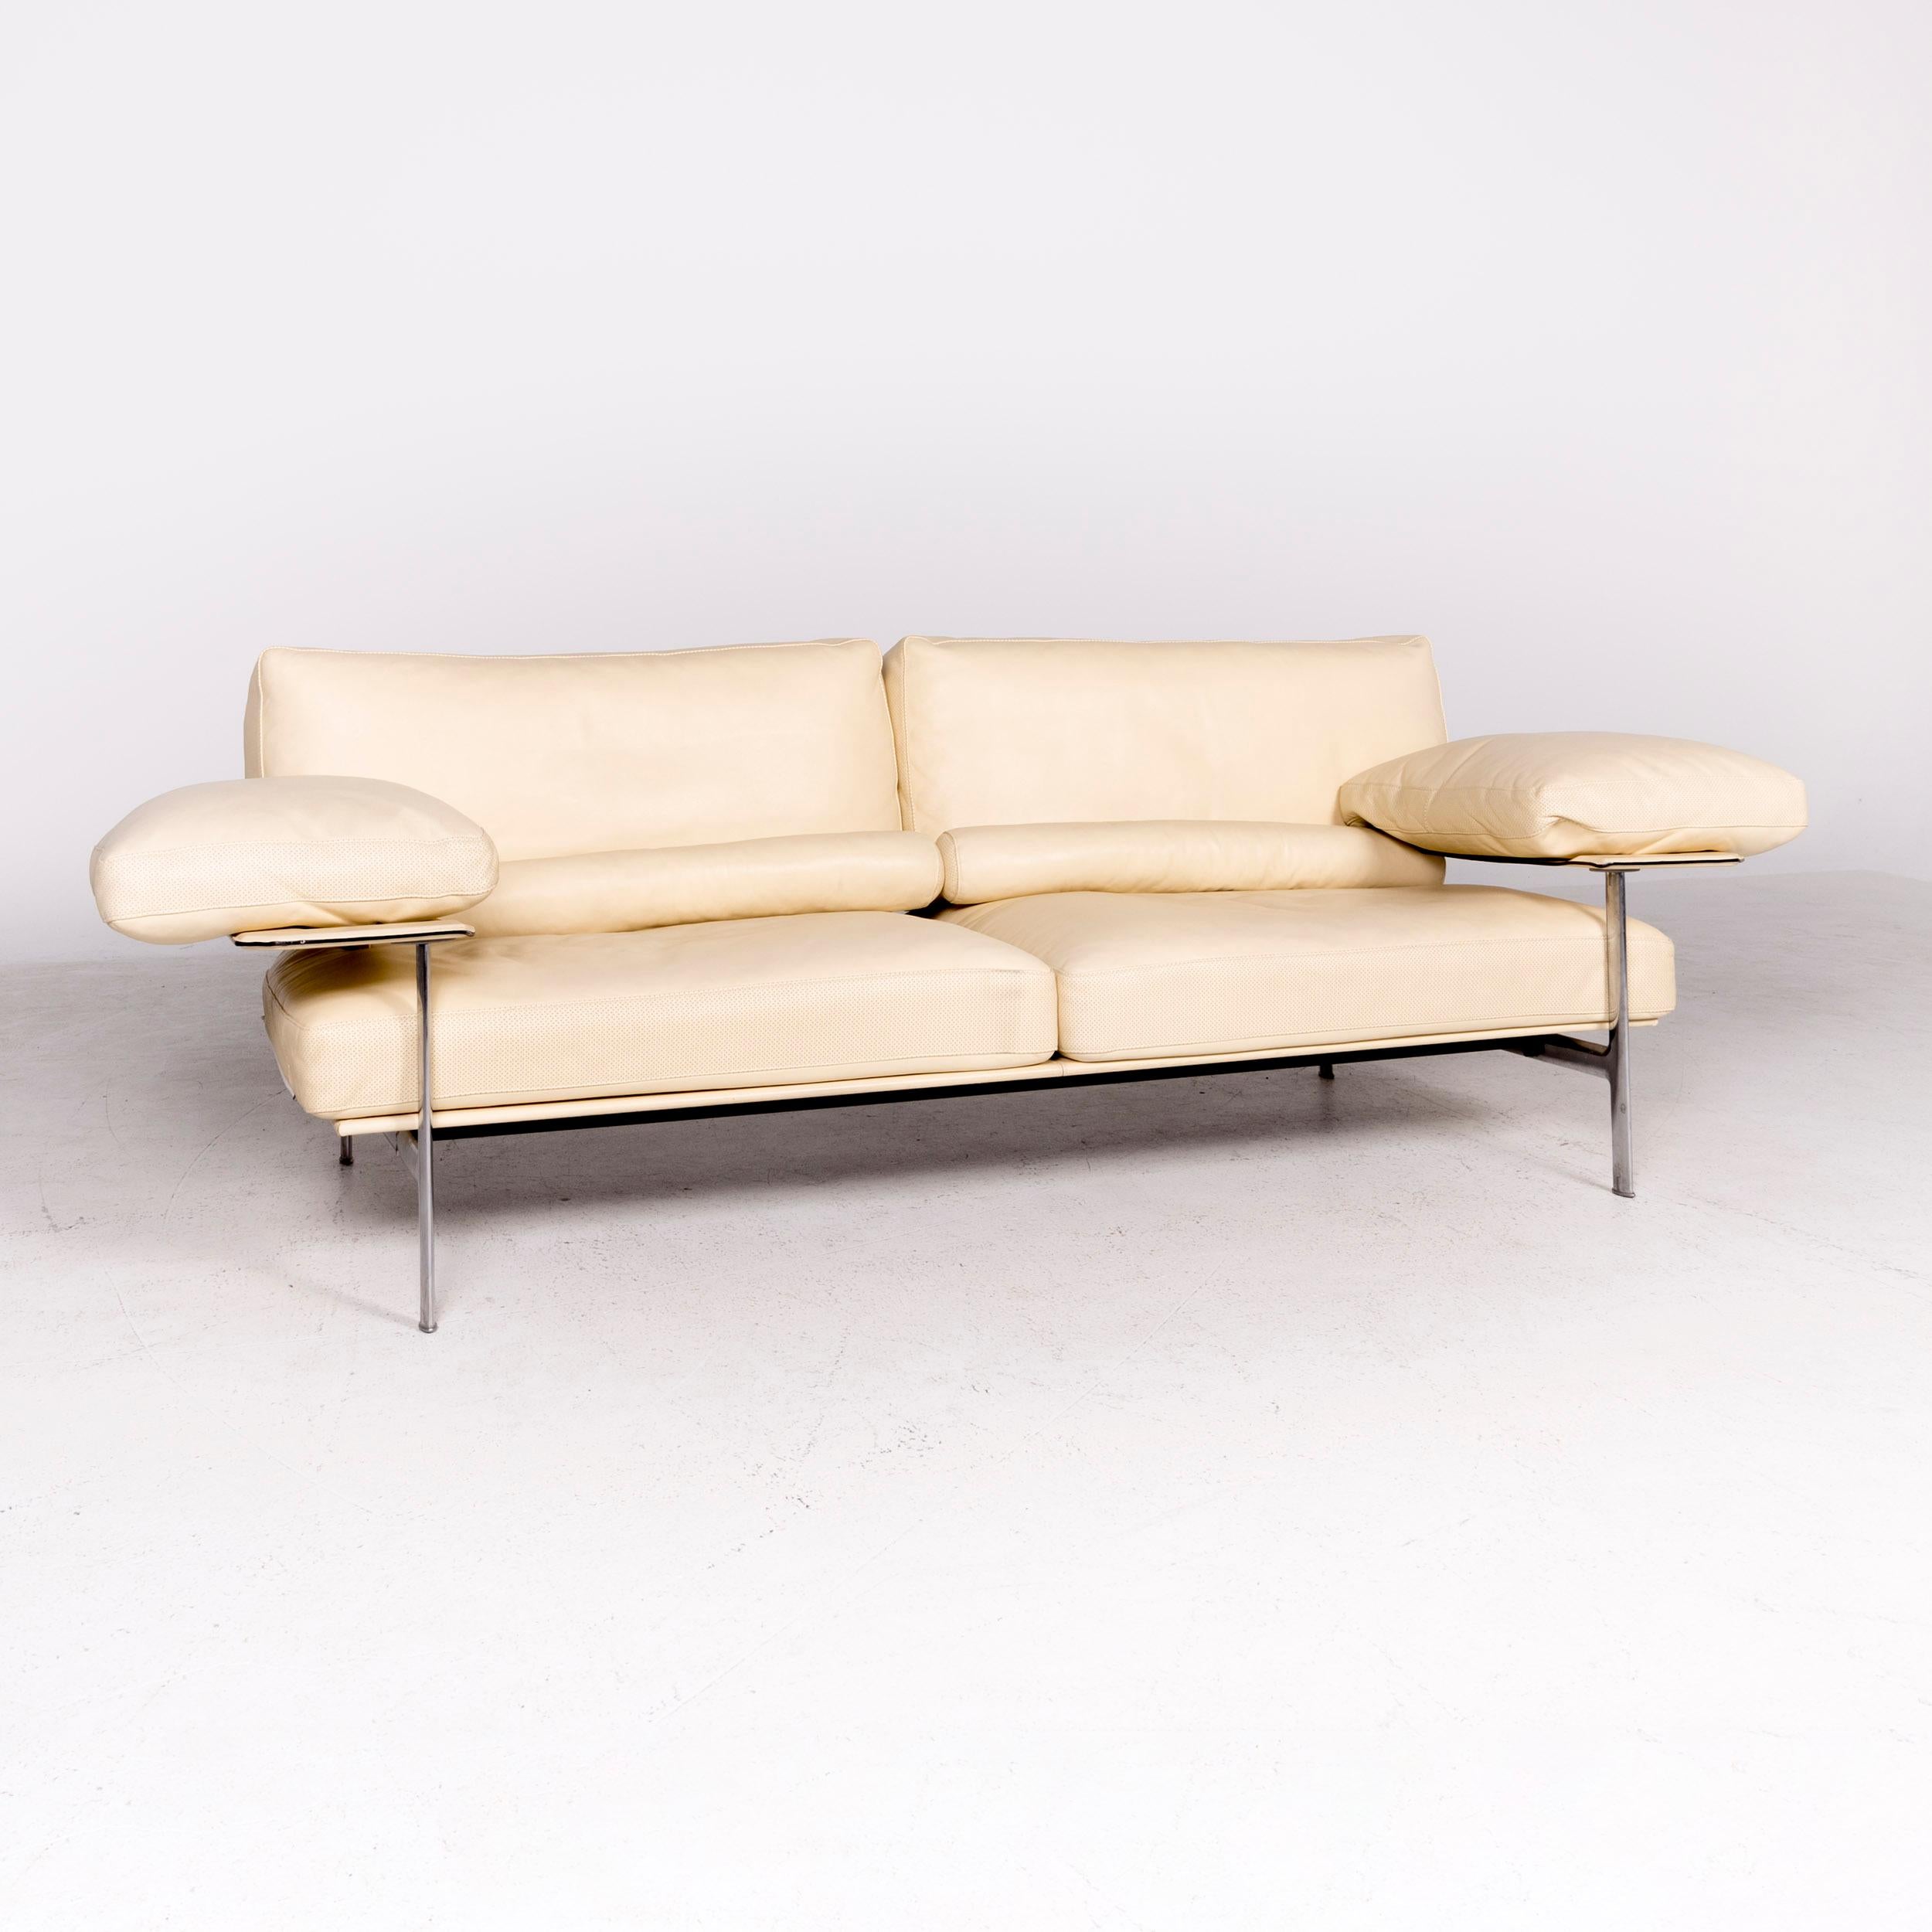 Modern B & B Italia Diesis Designer Leather Sofa Beige Real Leather Three-Seat Couch For Sale